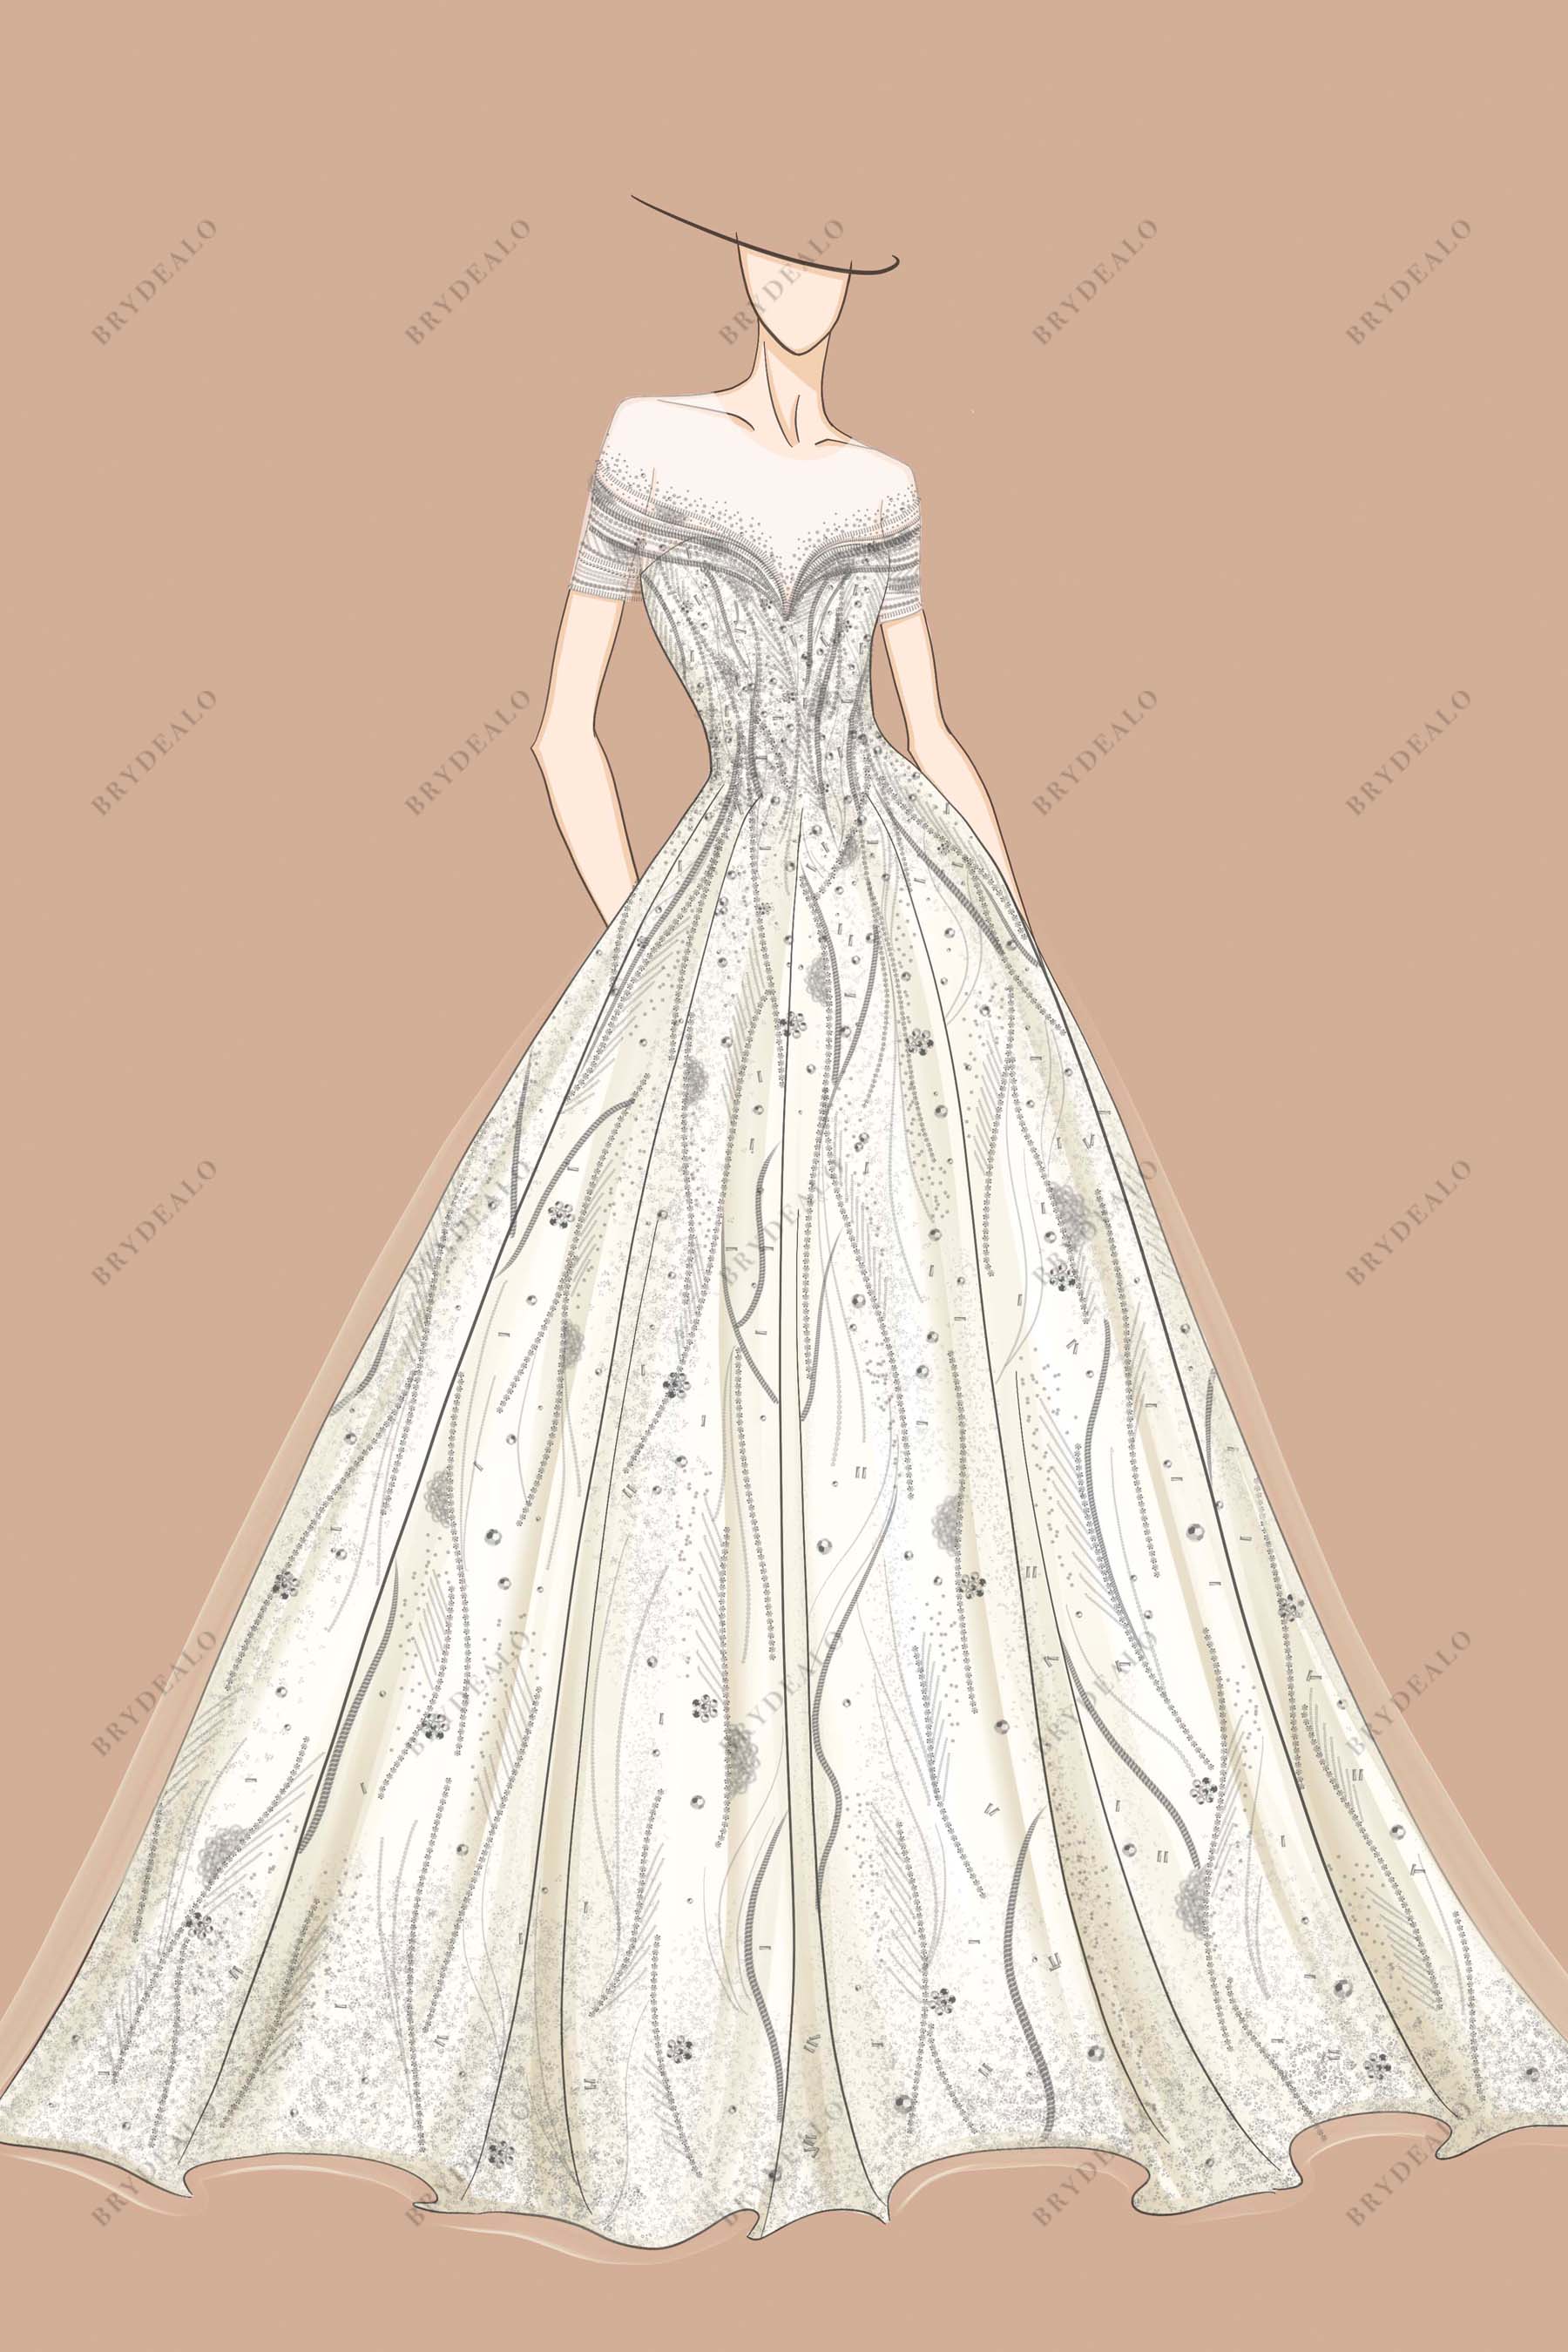 ball gown wedding dress sketches